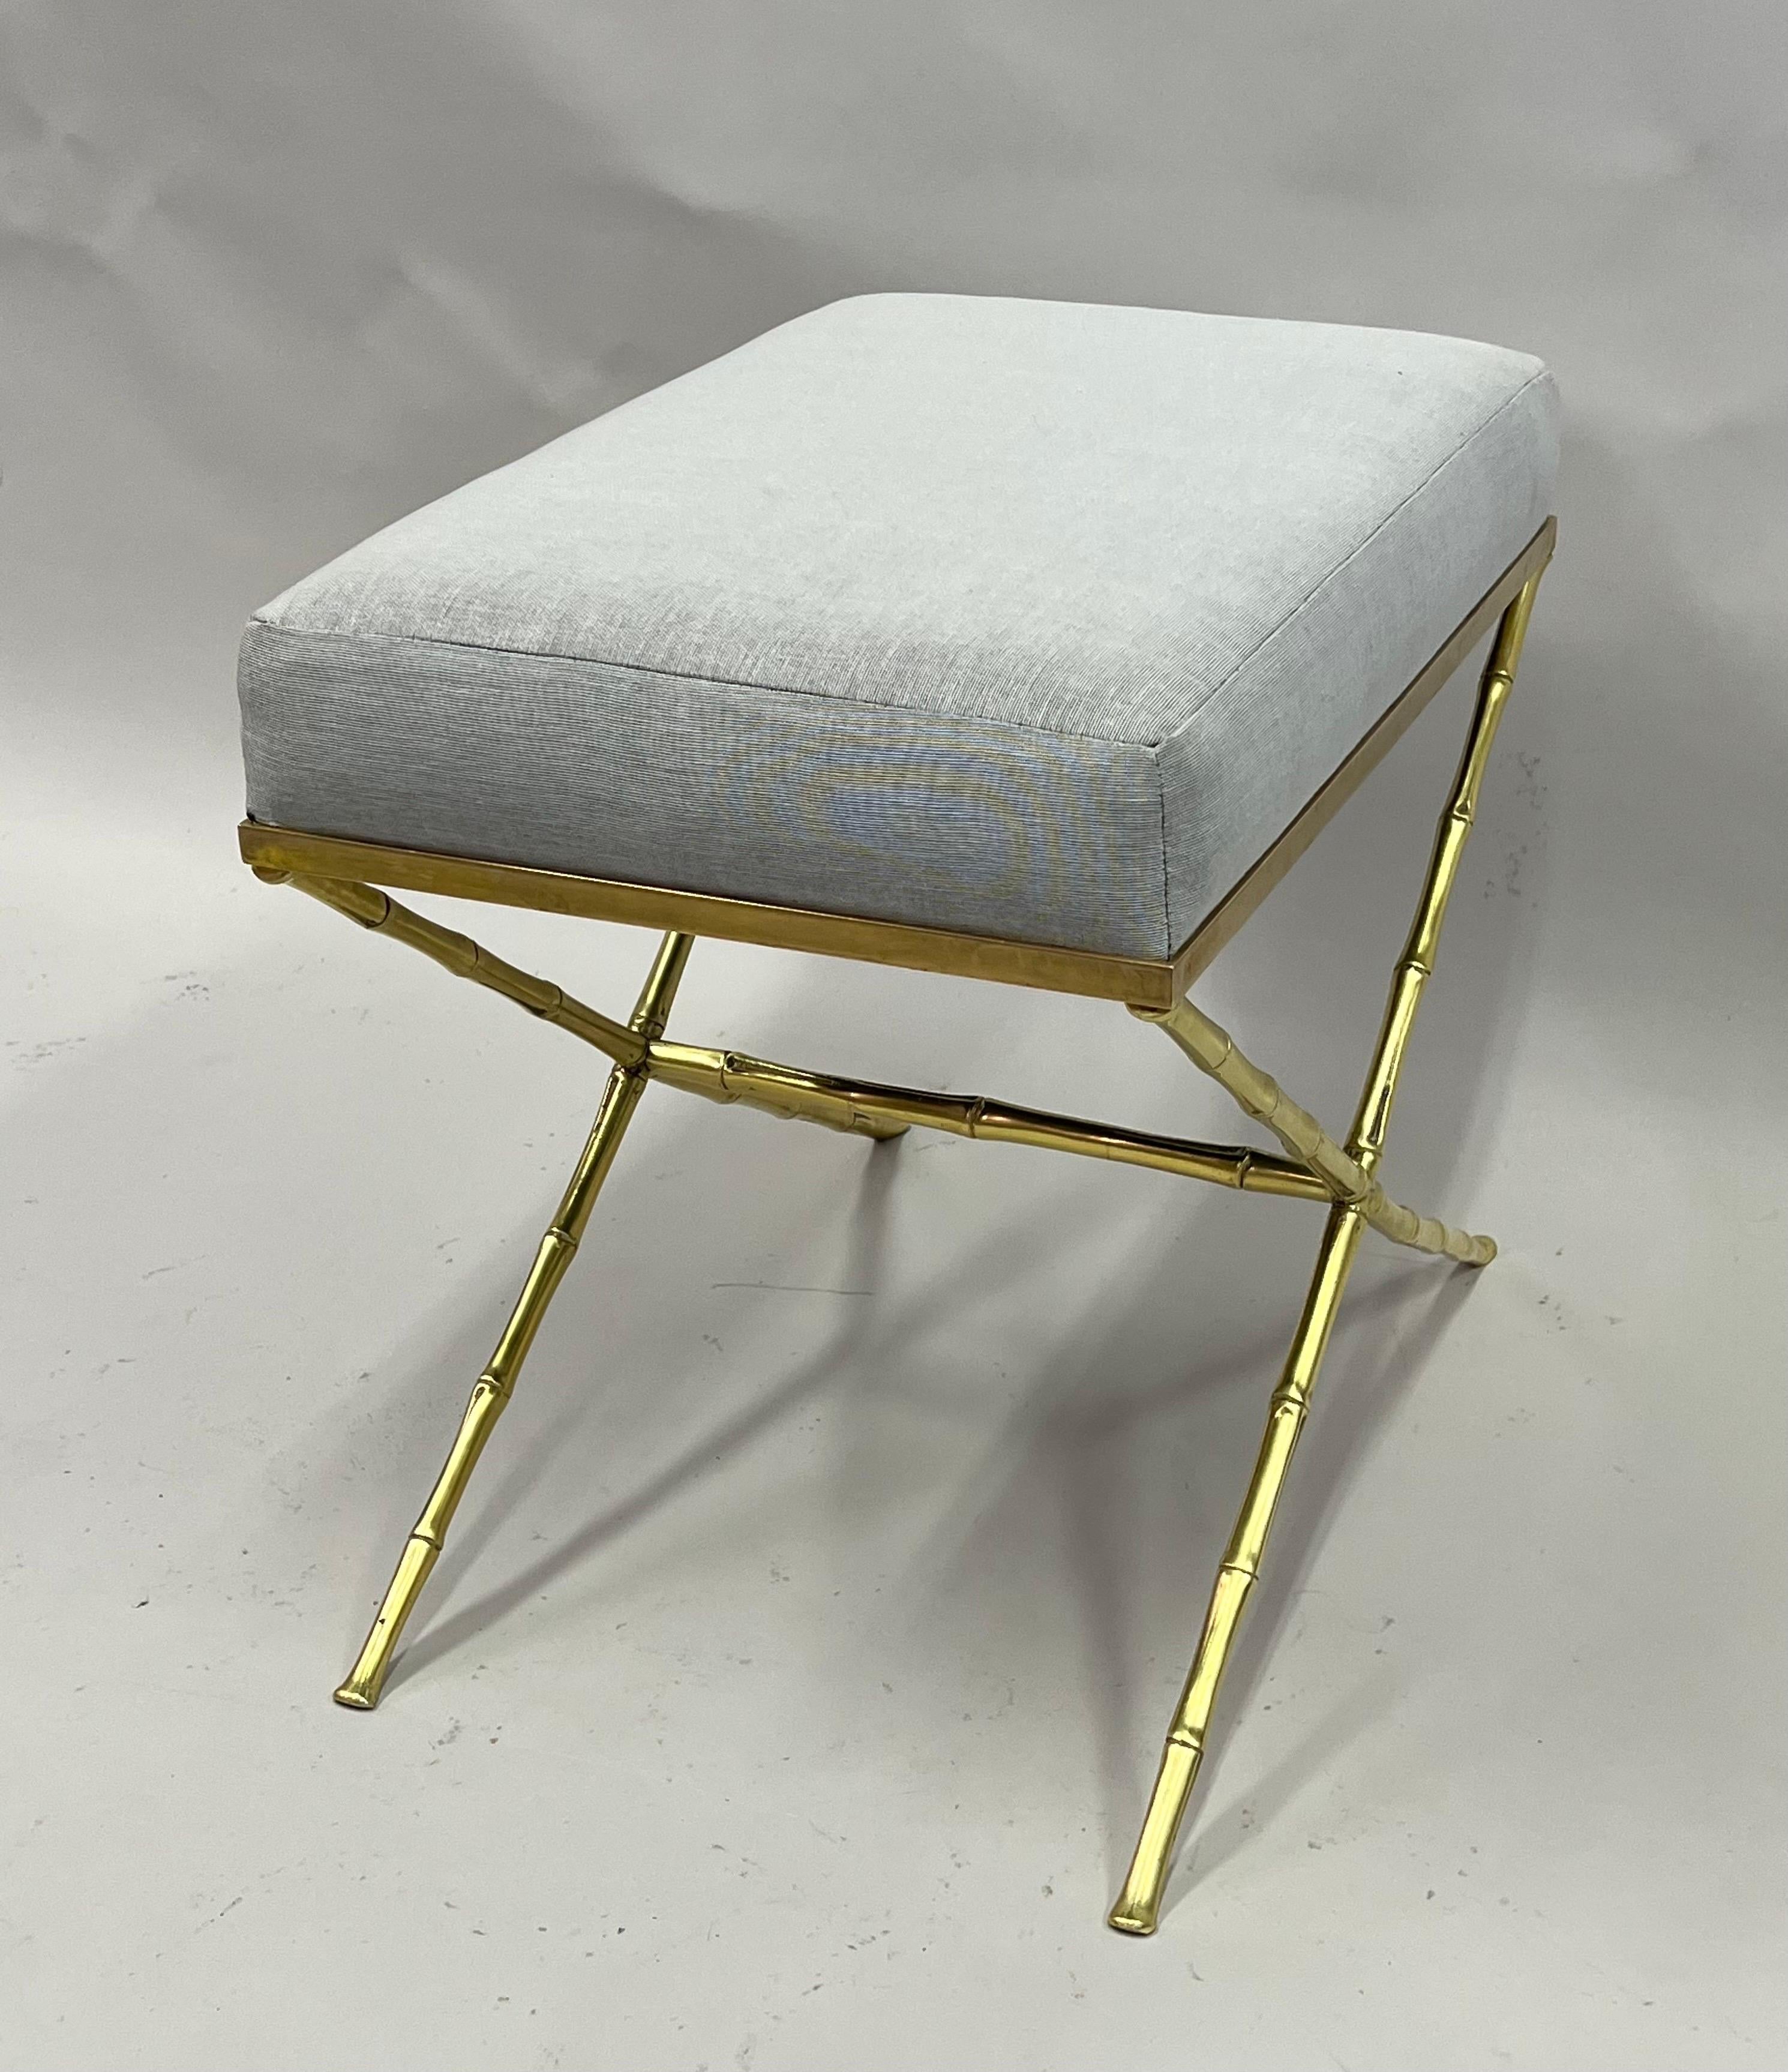 French Mid-Century Modern Neoclassical Brass Faux Bamboo Bench by Maison Baguès For Sale 5